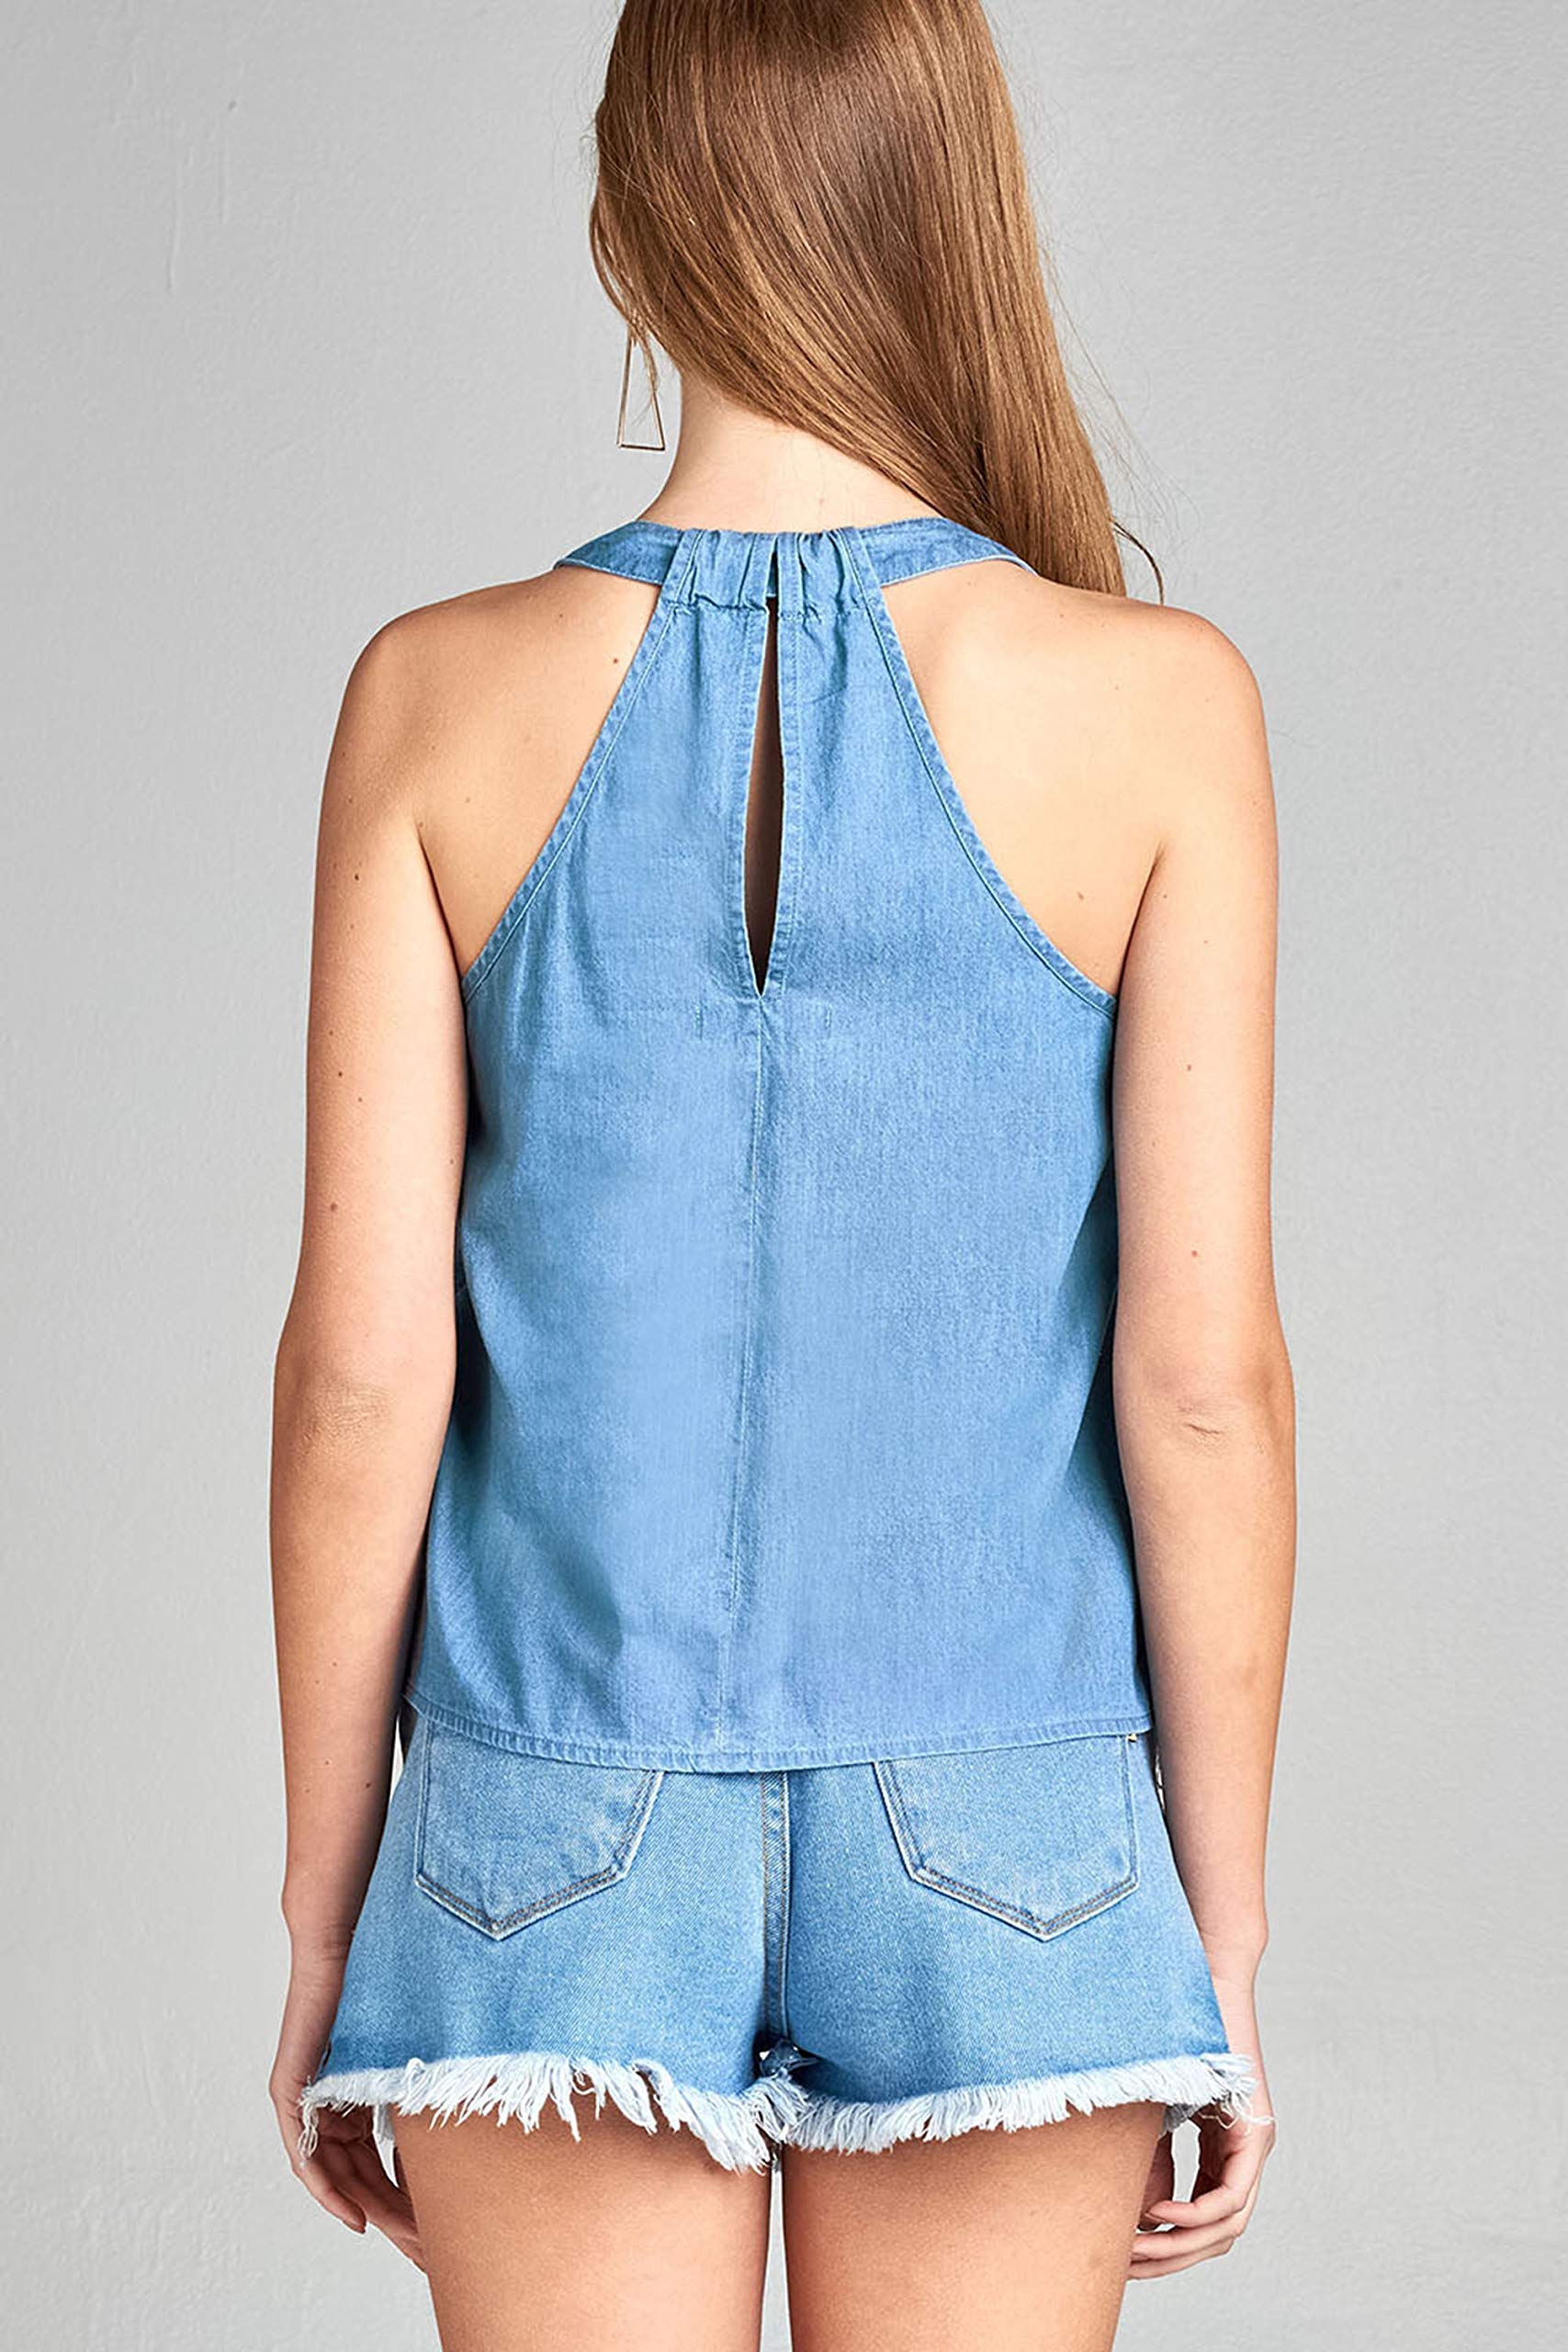 Women's Sleeveless Scoop Neck Front Button Detail Chambray Top